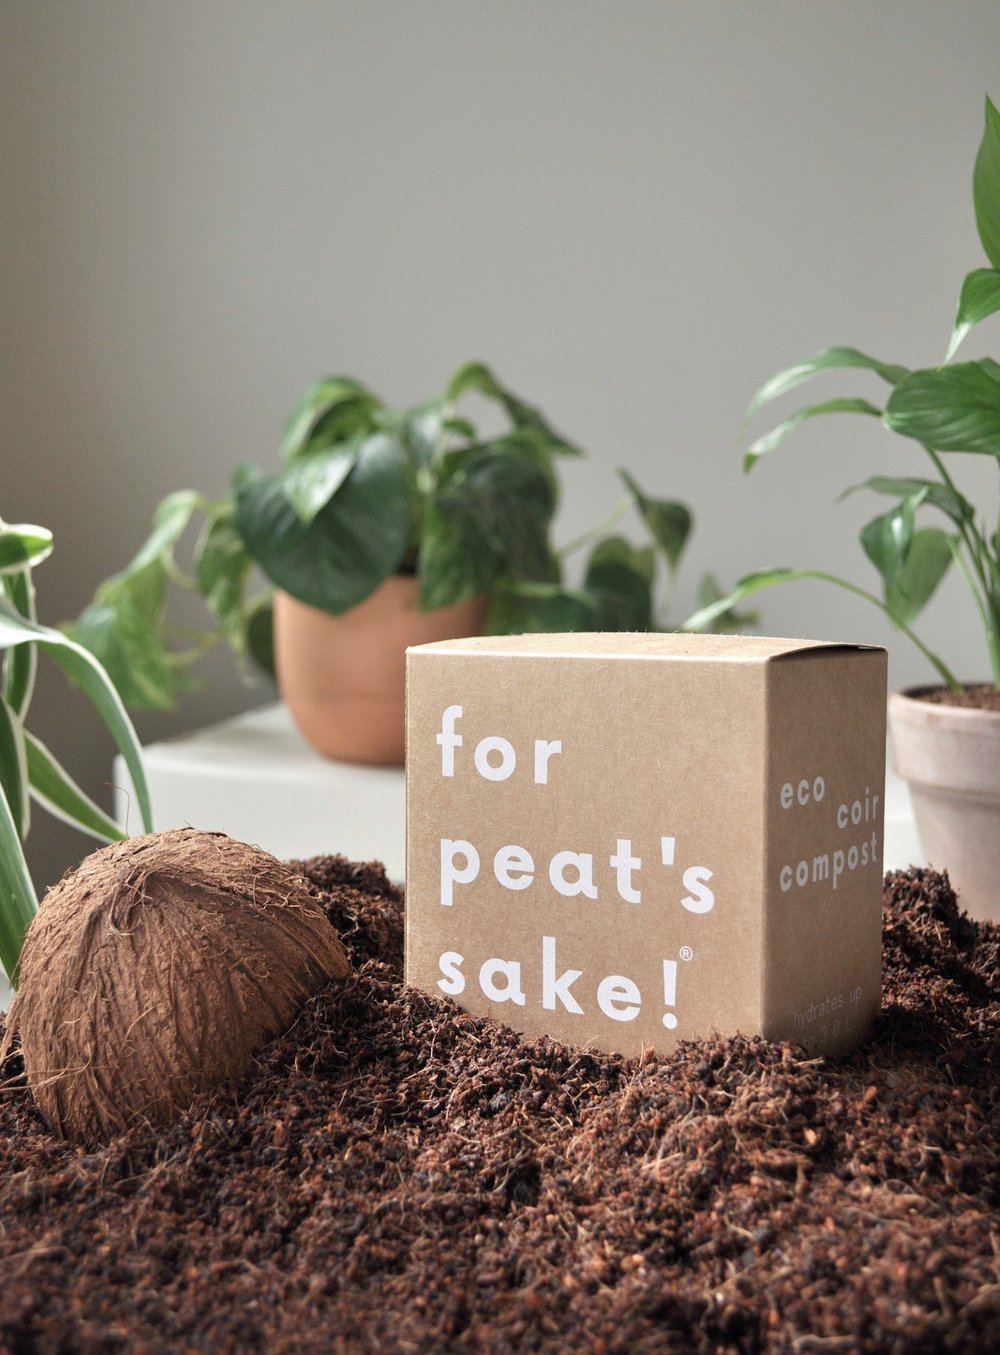 Peat-free Coir Compost Box - £5 for 3L - For Peat’s Sake